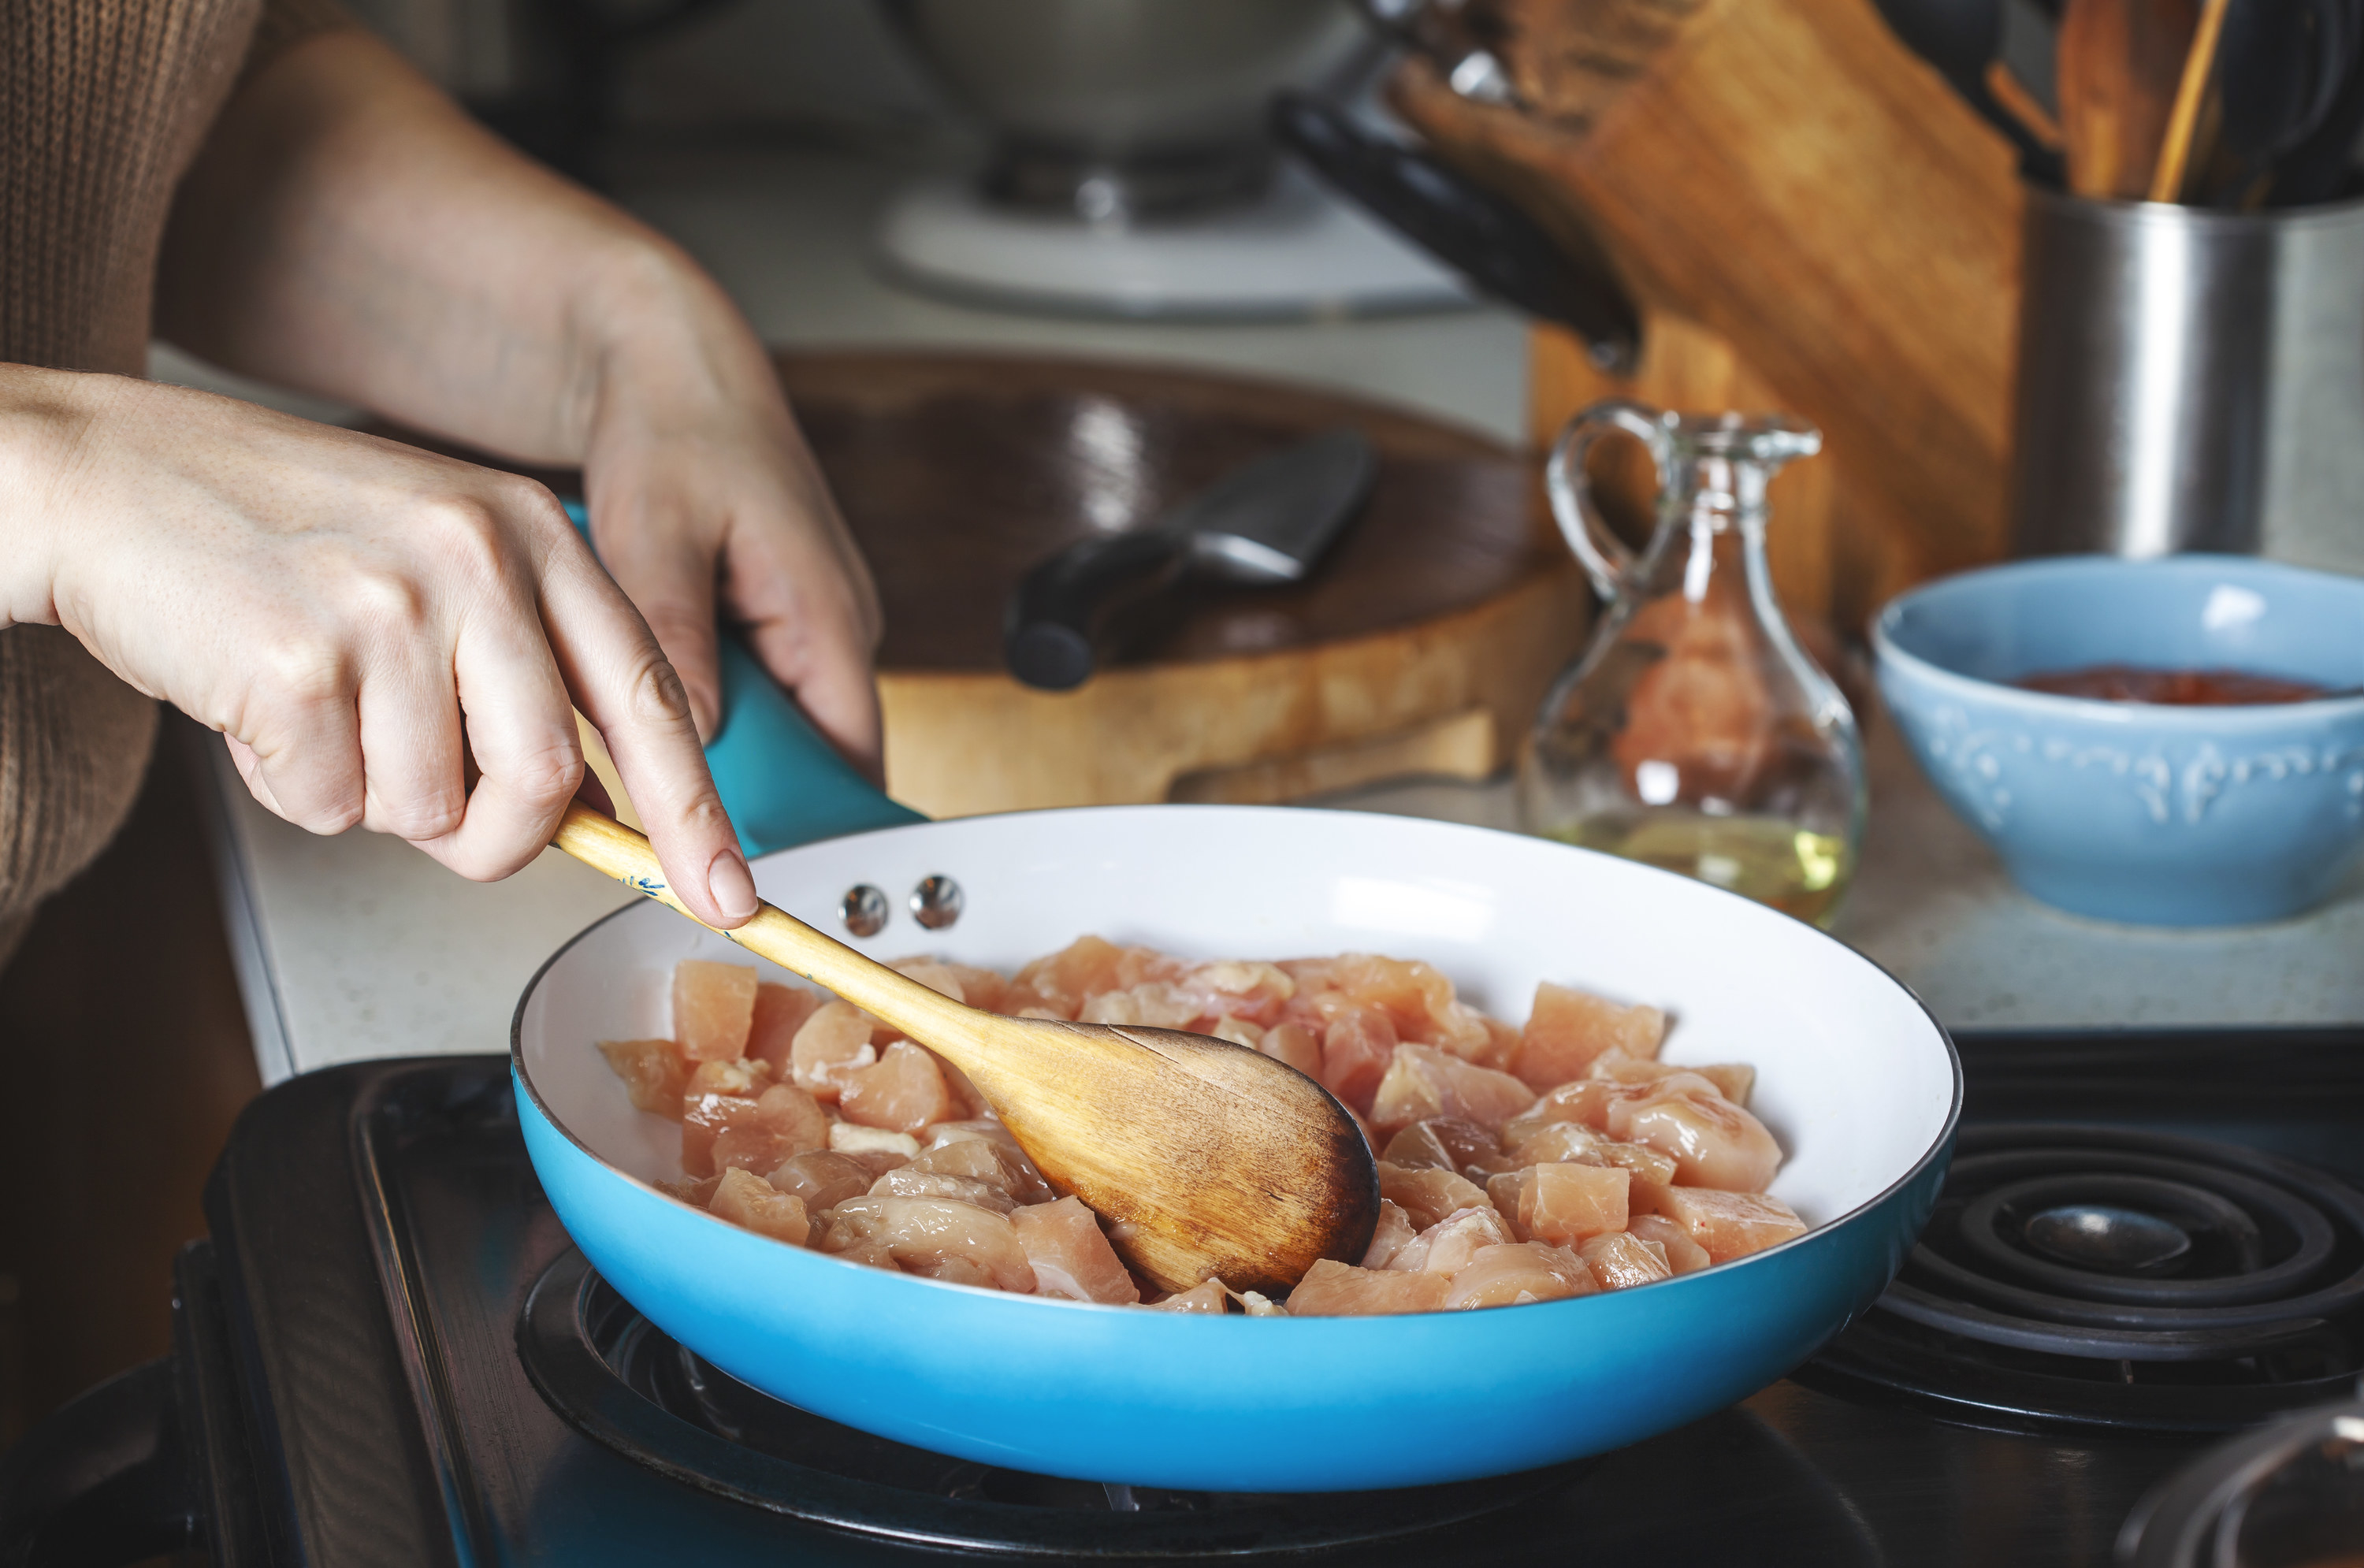 Raw chicken cooking in a nonstick skillet